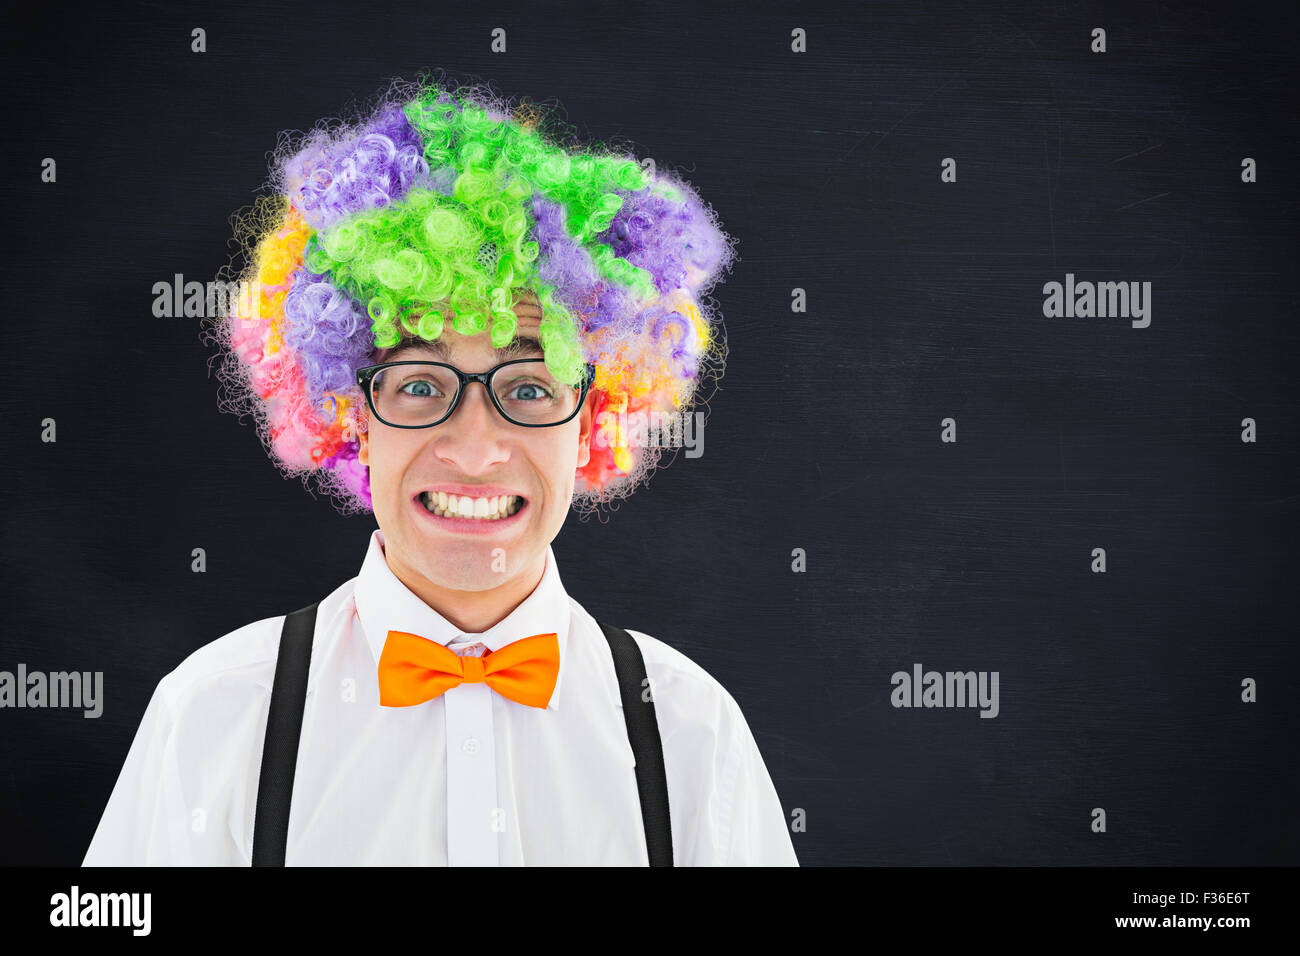 Composite image of geeky hipster wearing a rainbow wig Stock Photo